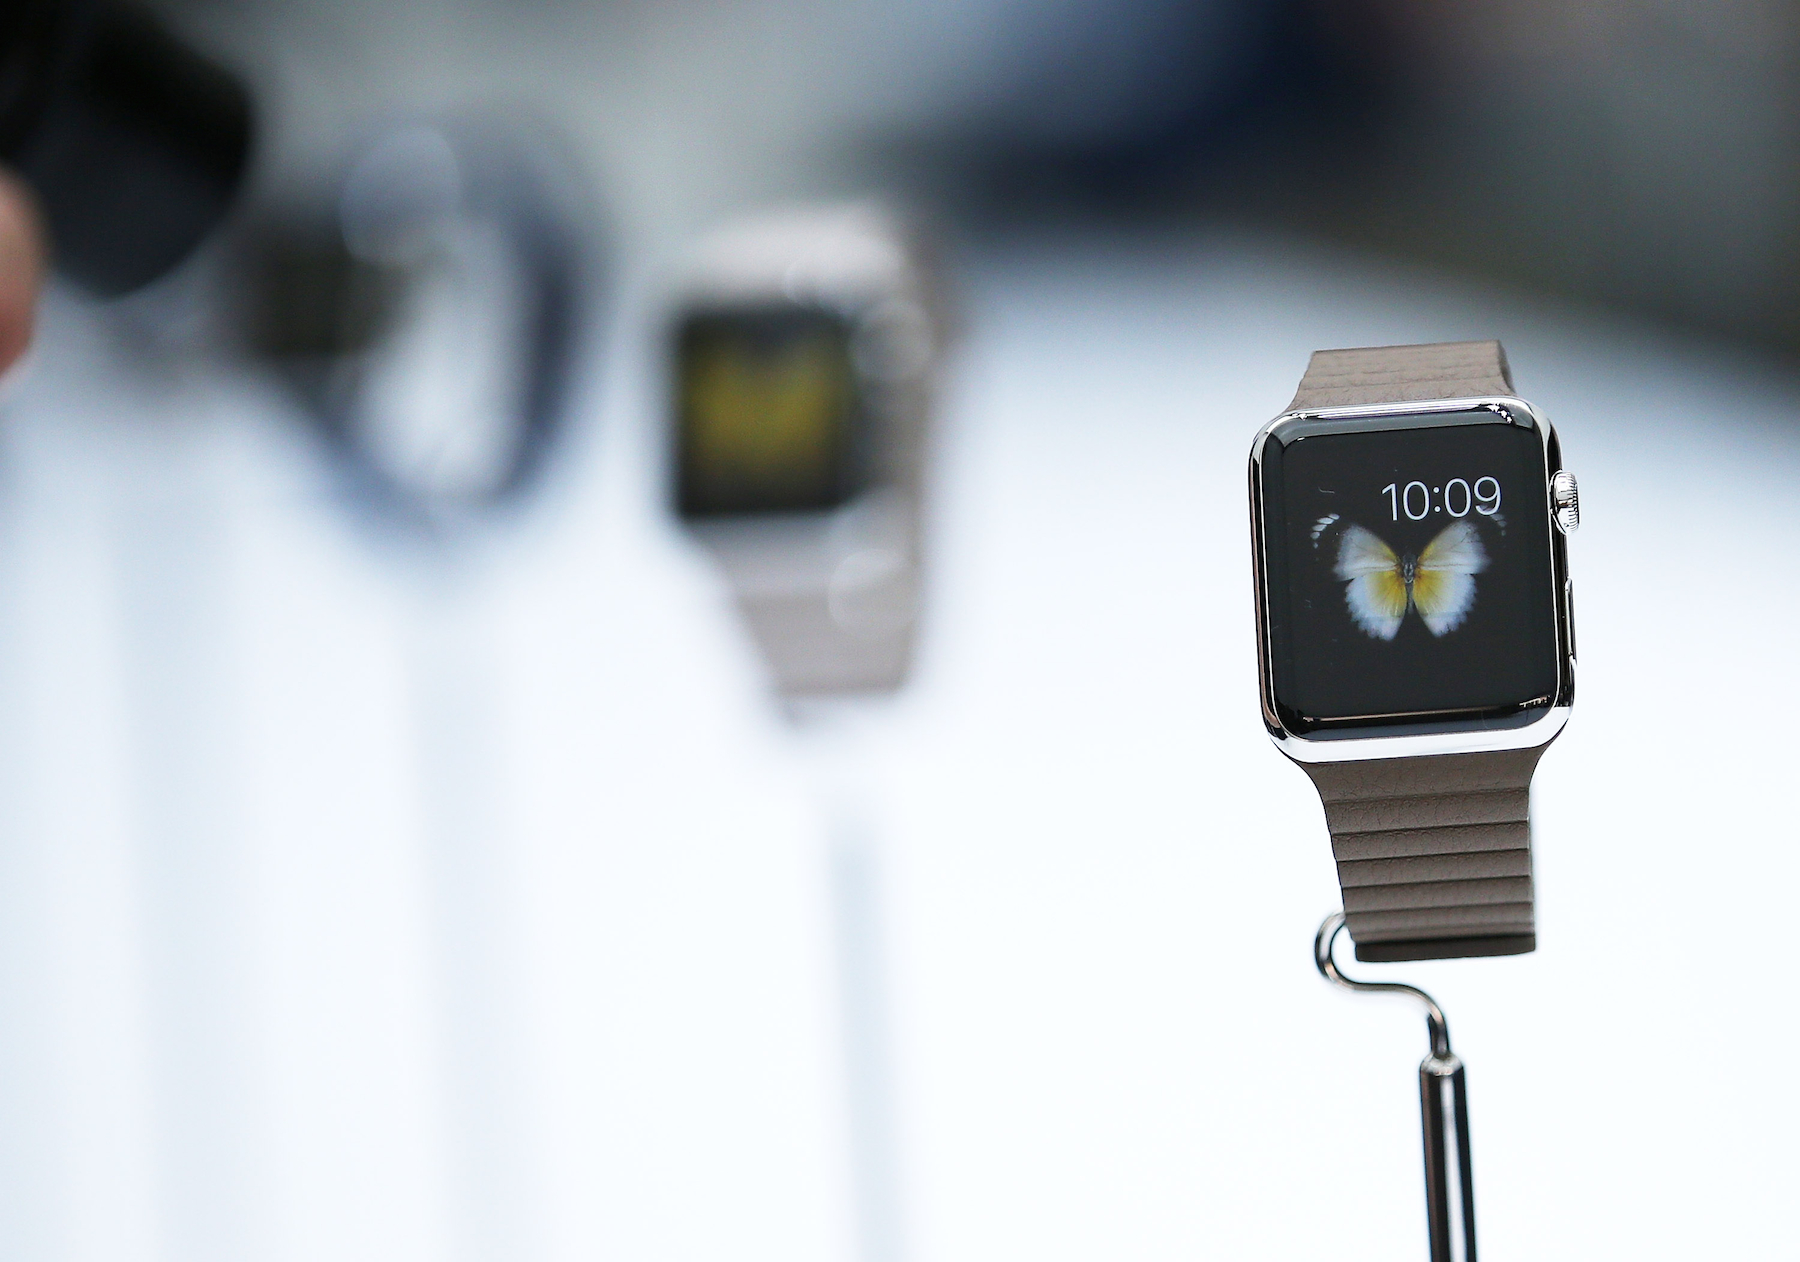 5 expectations for Monday’s Apple Watch event